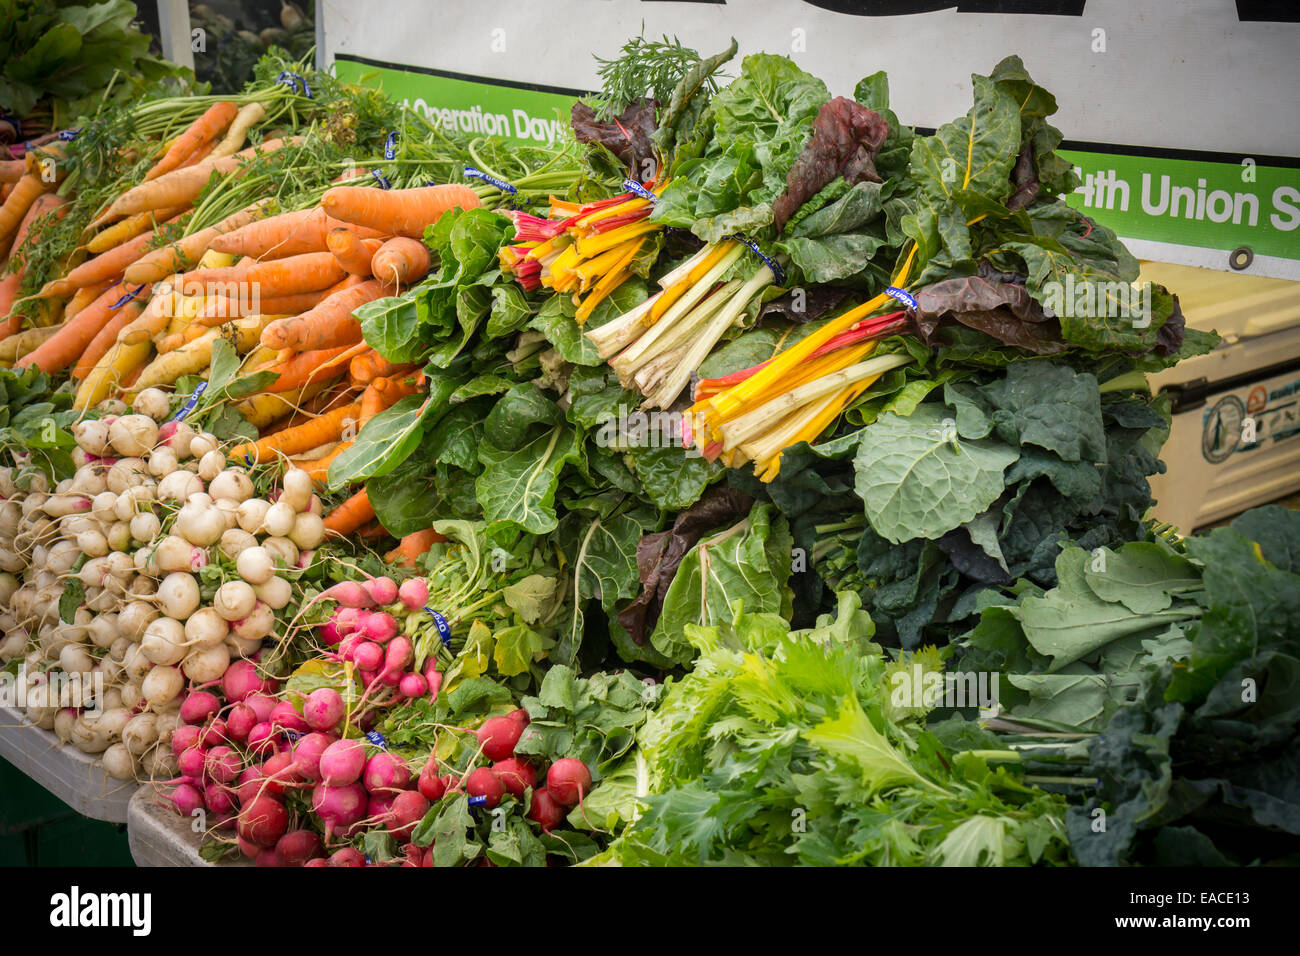 Organic swiss chard, carrots, beets and other vegetables are seen at the Union Square Greenmarket in New york Stock Photo